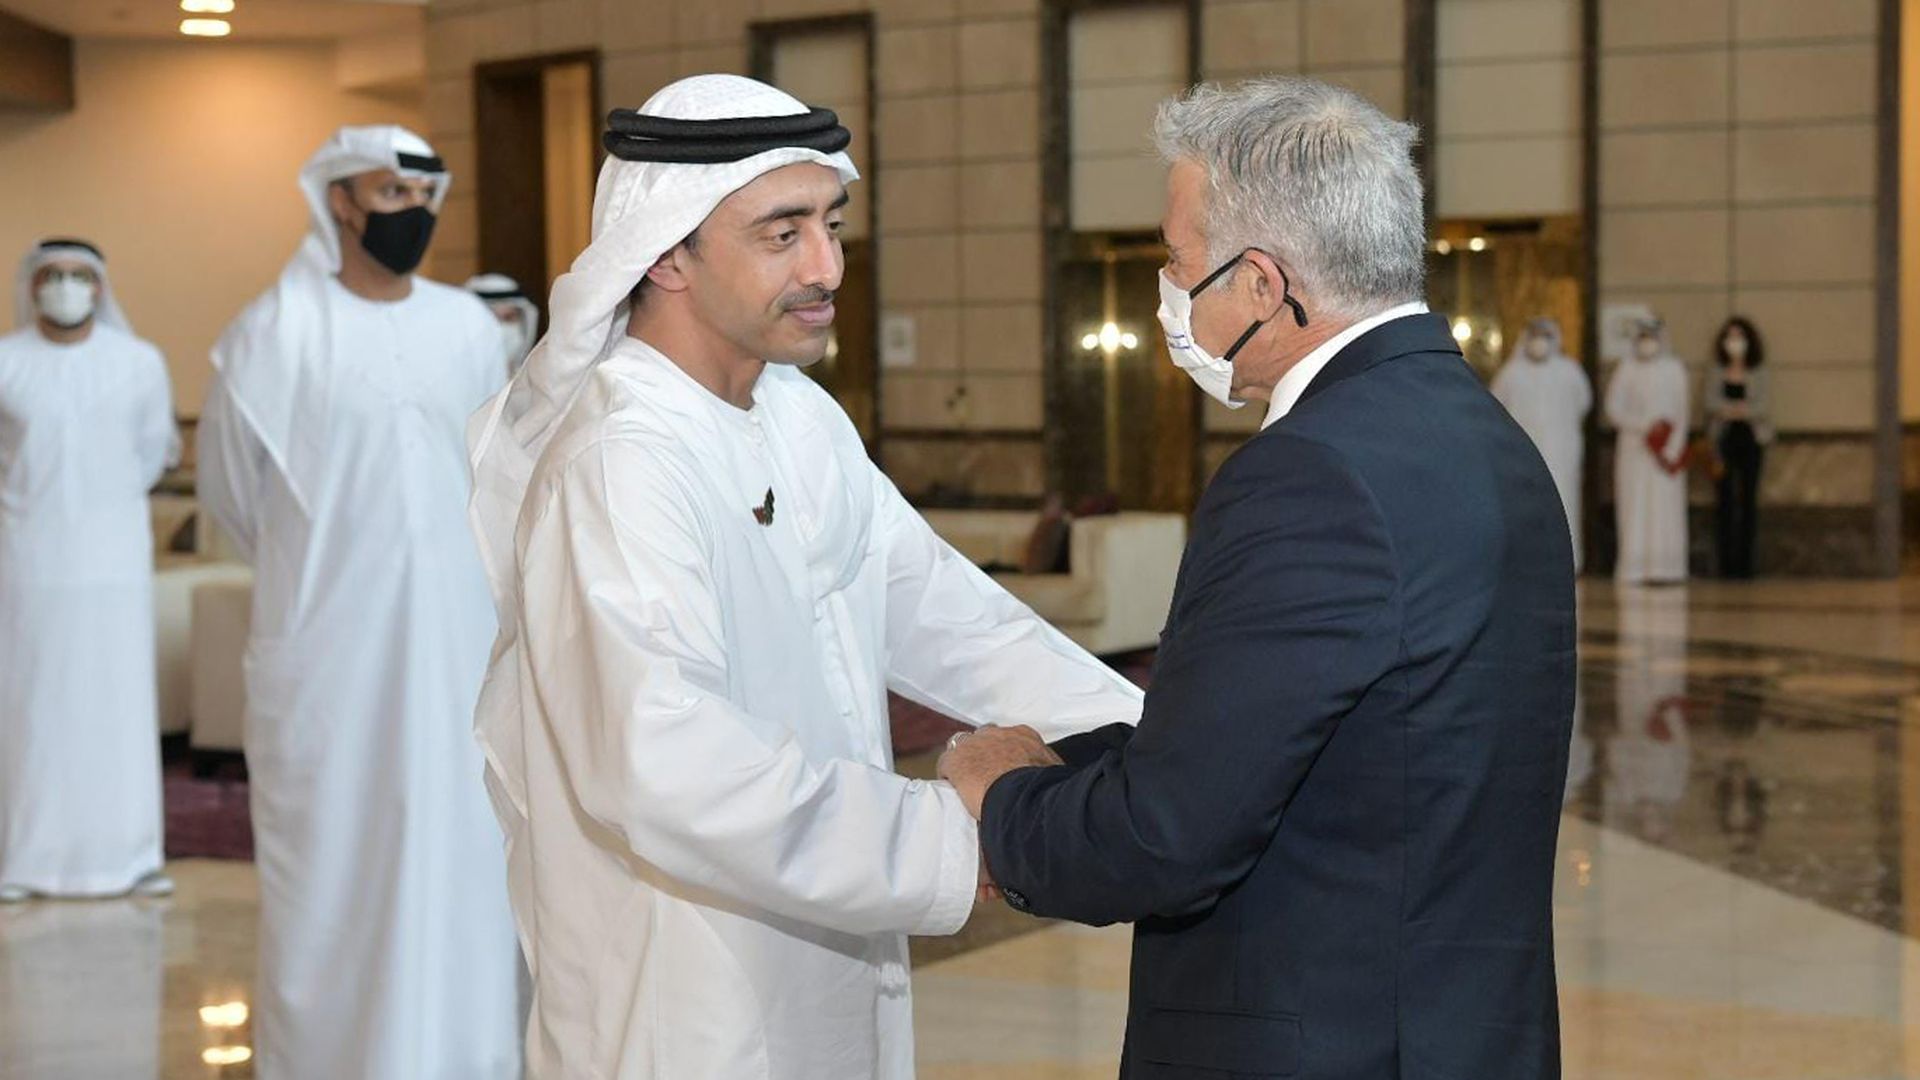 United Arab Emirates foreign minister Sheikh Abdullah bin Zayed shakes hands with Israeli foreign minister Yair Lapid